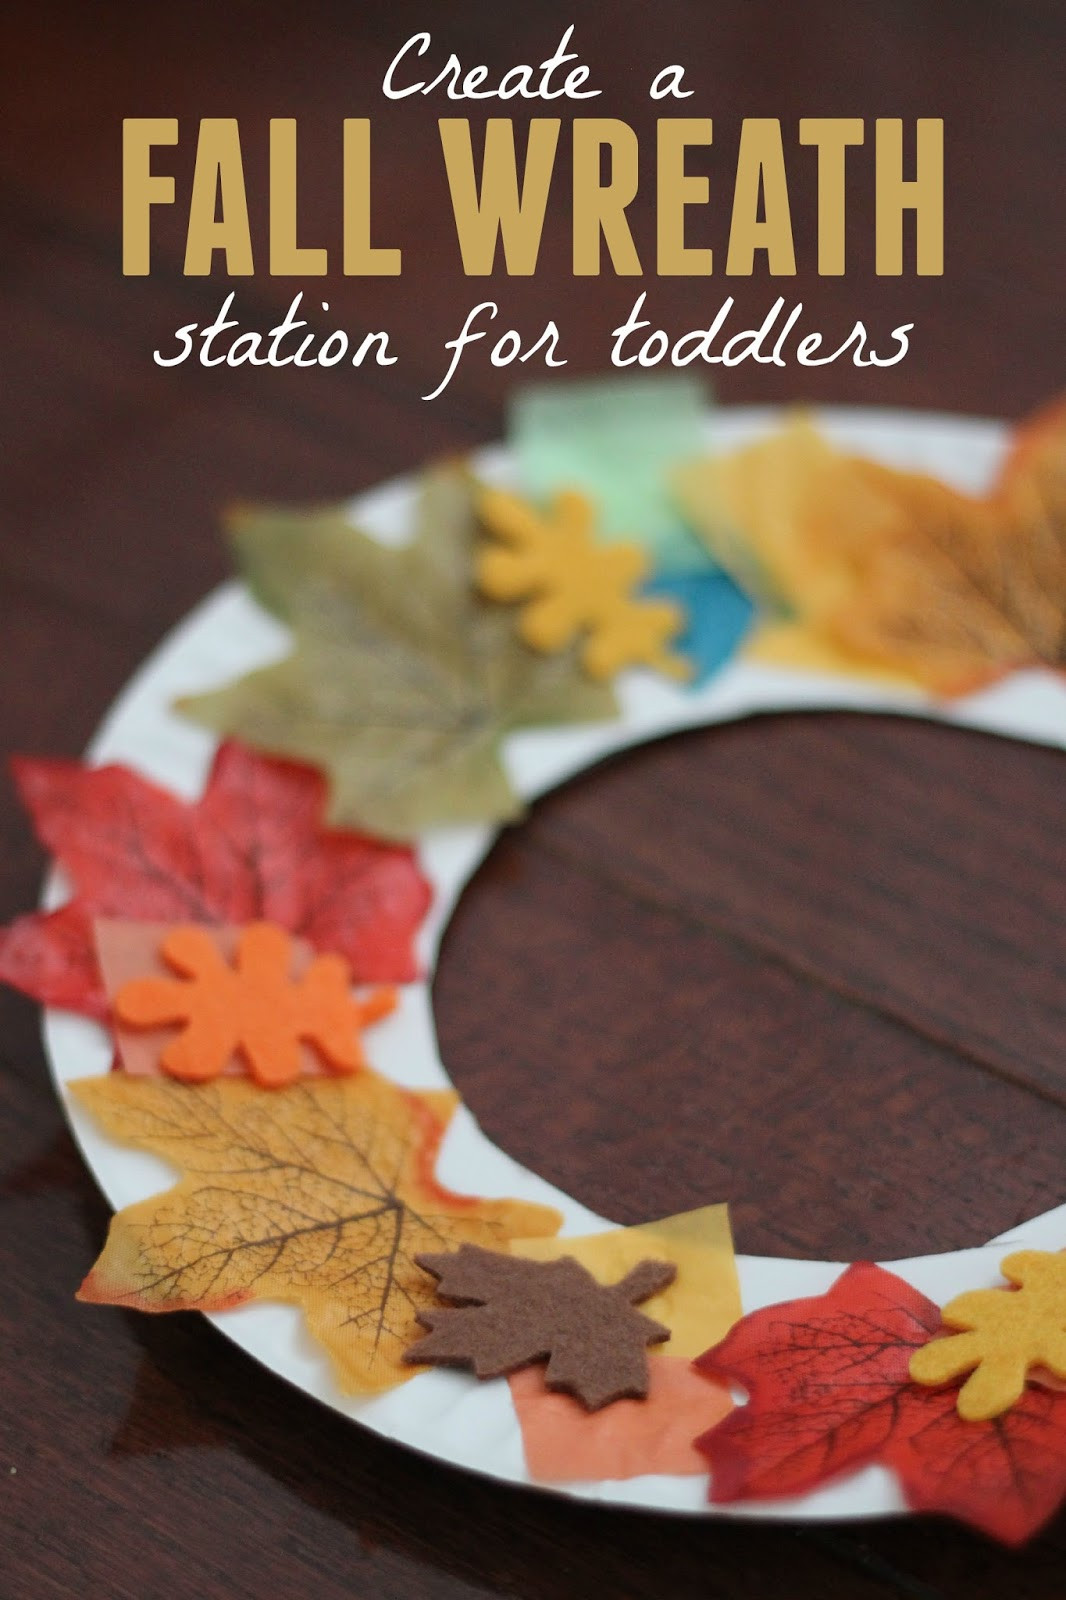 Fall Preschool Craft Ideas
 Toddler Approved Fall Wreath Making Station for Toddlers